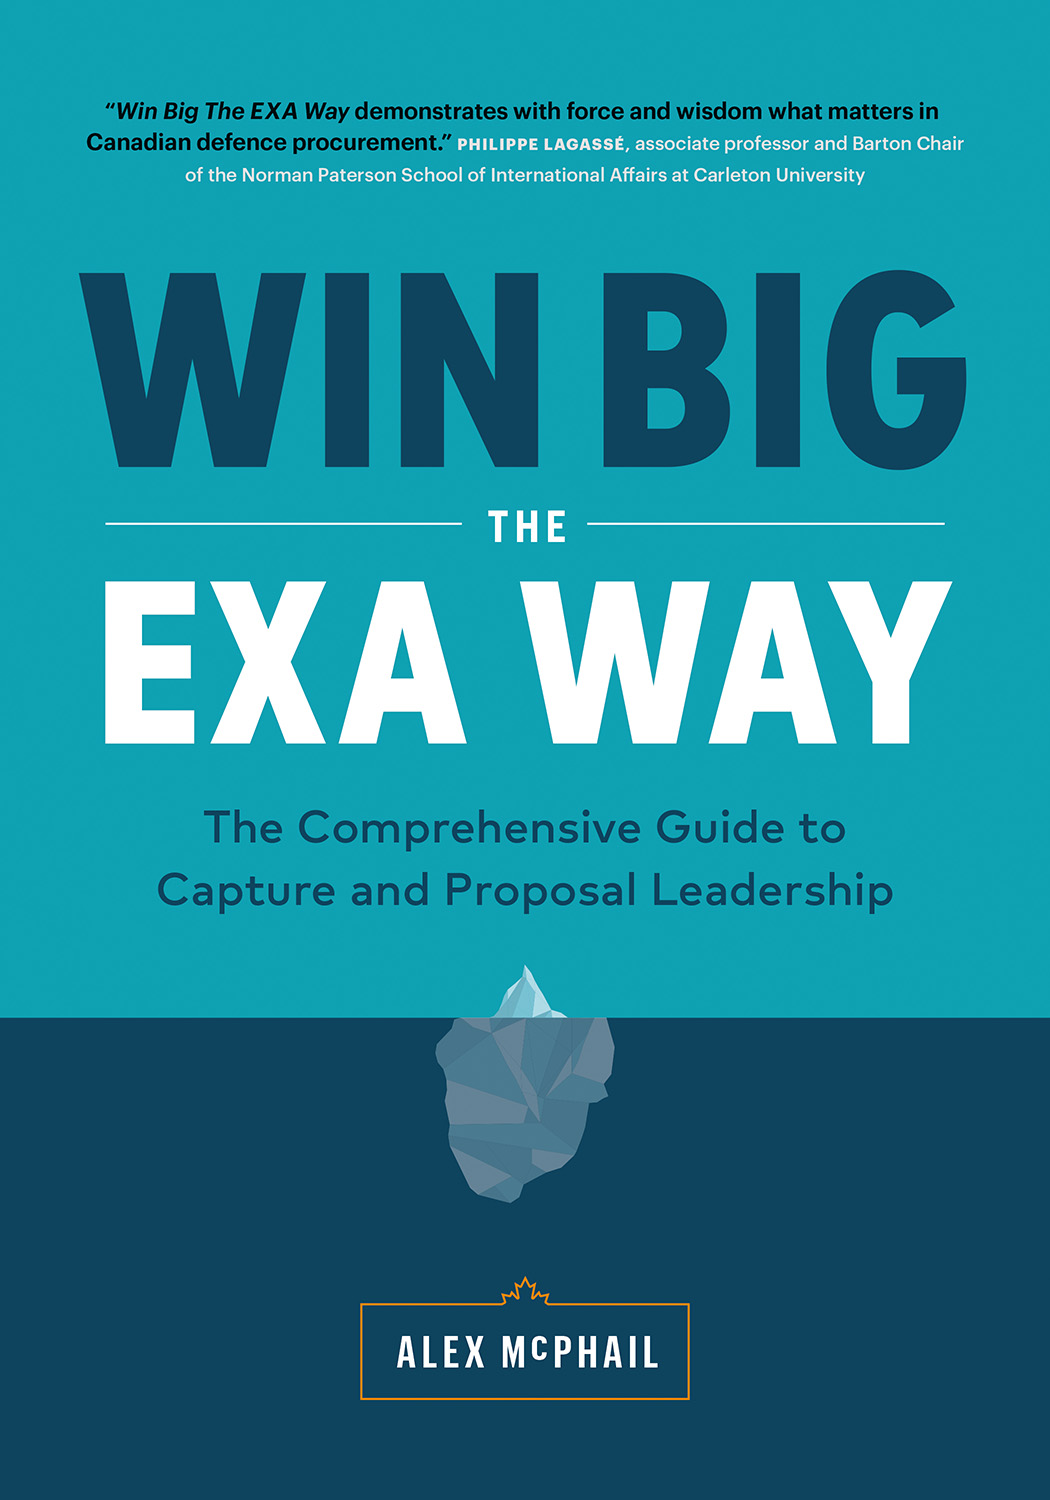 Win Big the EXA Way by Alex McPhail book cover